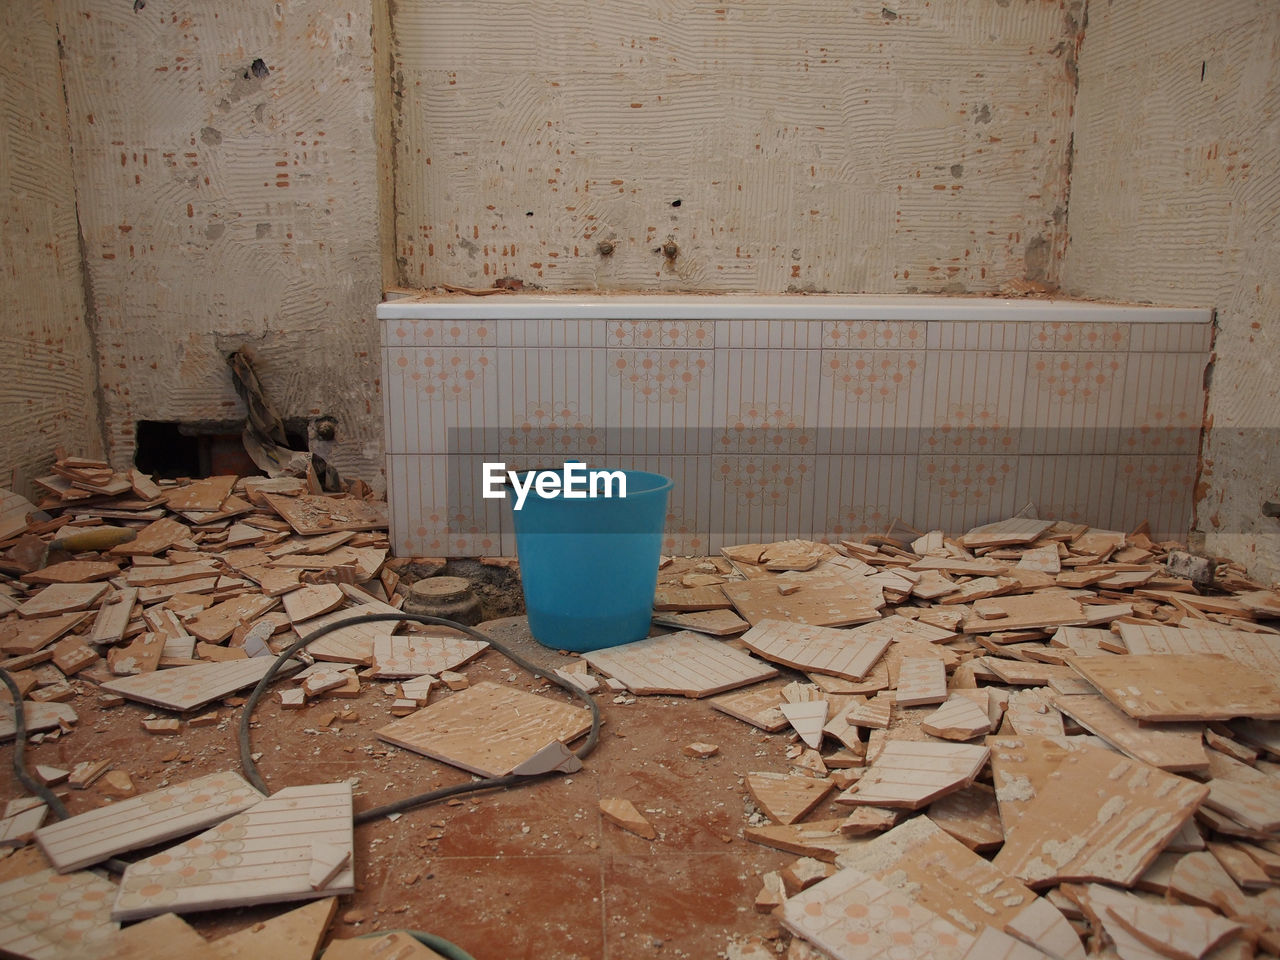 wall, floor, flooring, wood, abandoned, no people, damaged, indoors, wall - building feature, architecture, dirt, messy, broken, ruined, rundown, room, tile, built structure, domestic room, destruction, building, decline, day, deterioration, old, home interior, toilet bowl